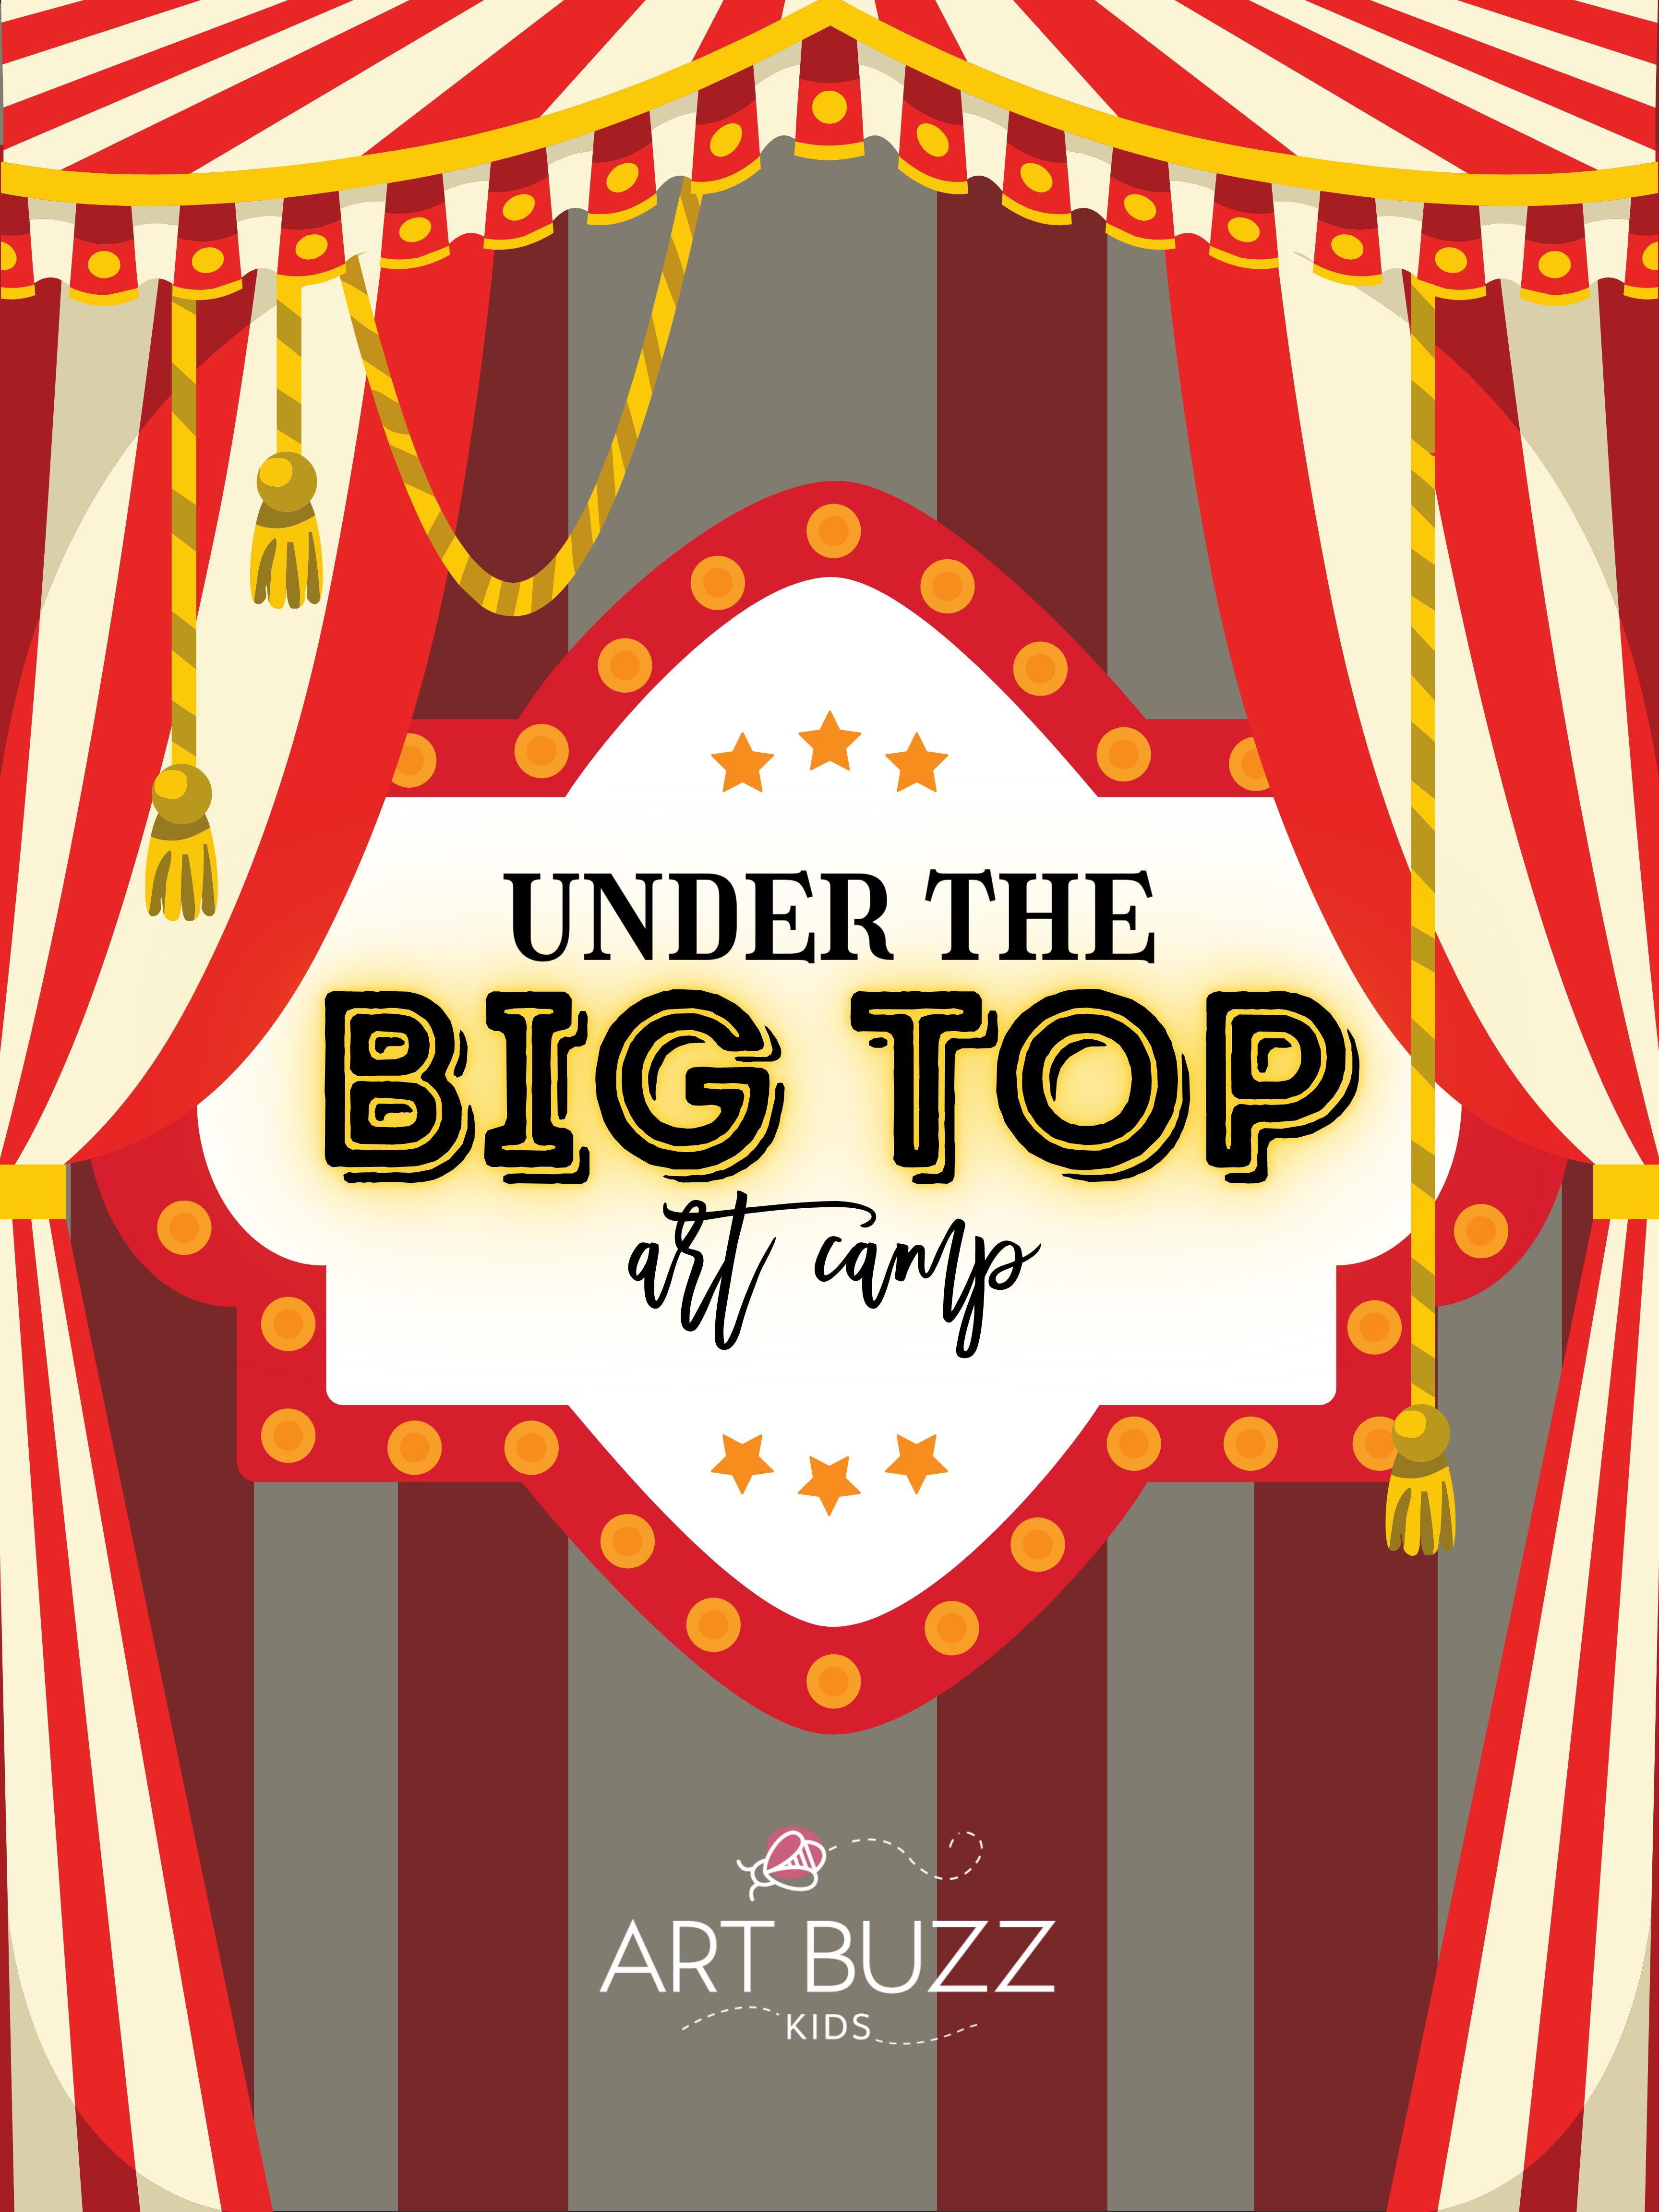 Under the Big Top Circus Kids Art Camp | July 15th-19th 10am-2:00pm